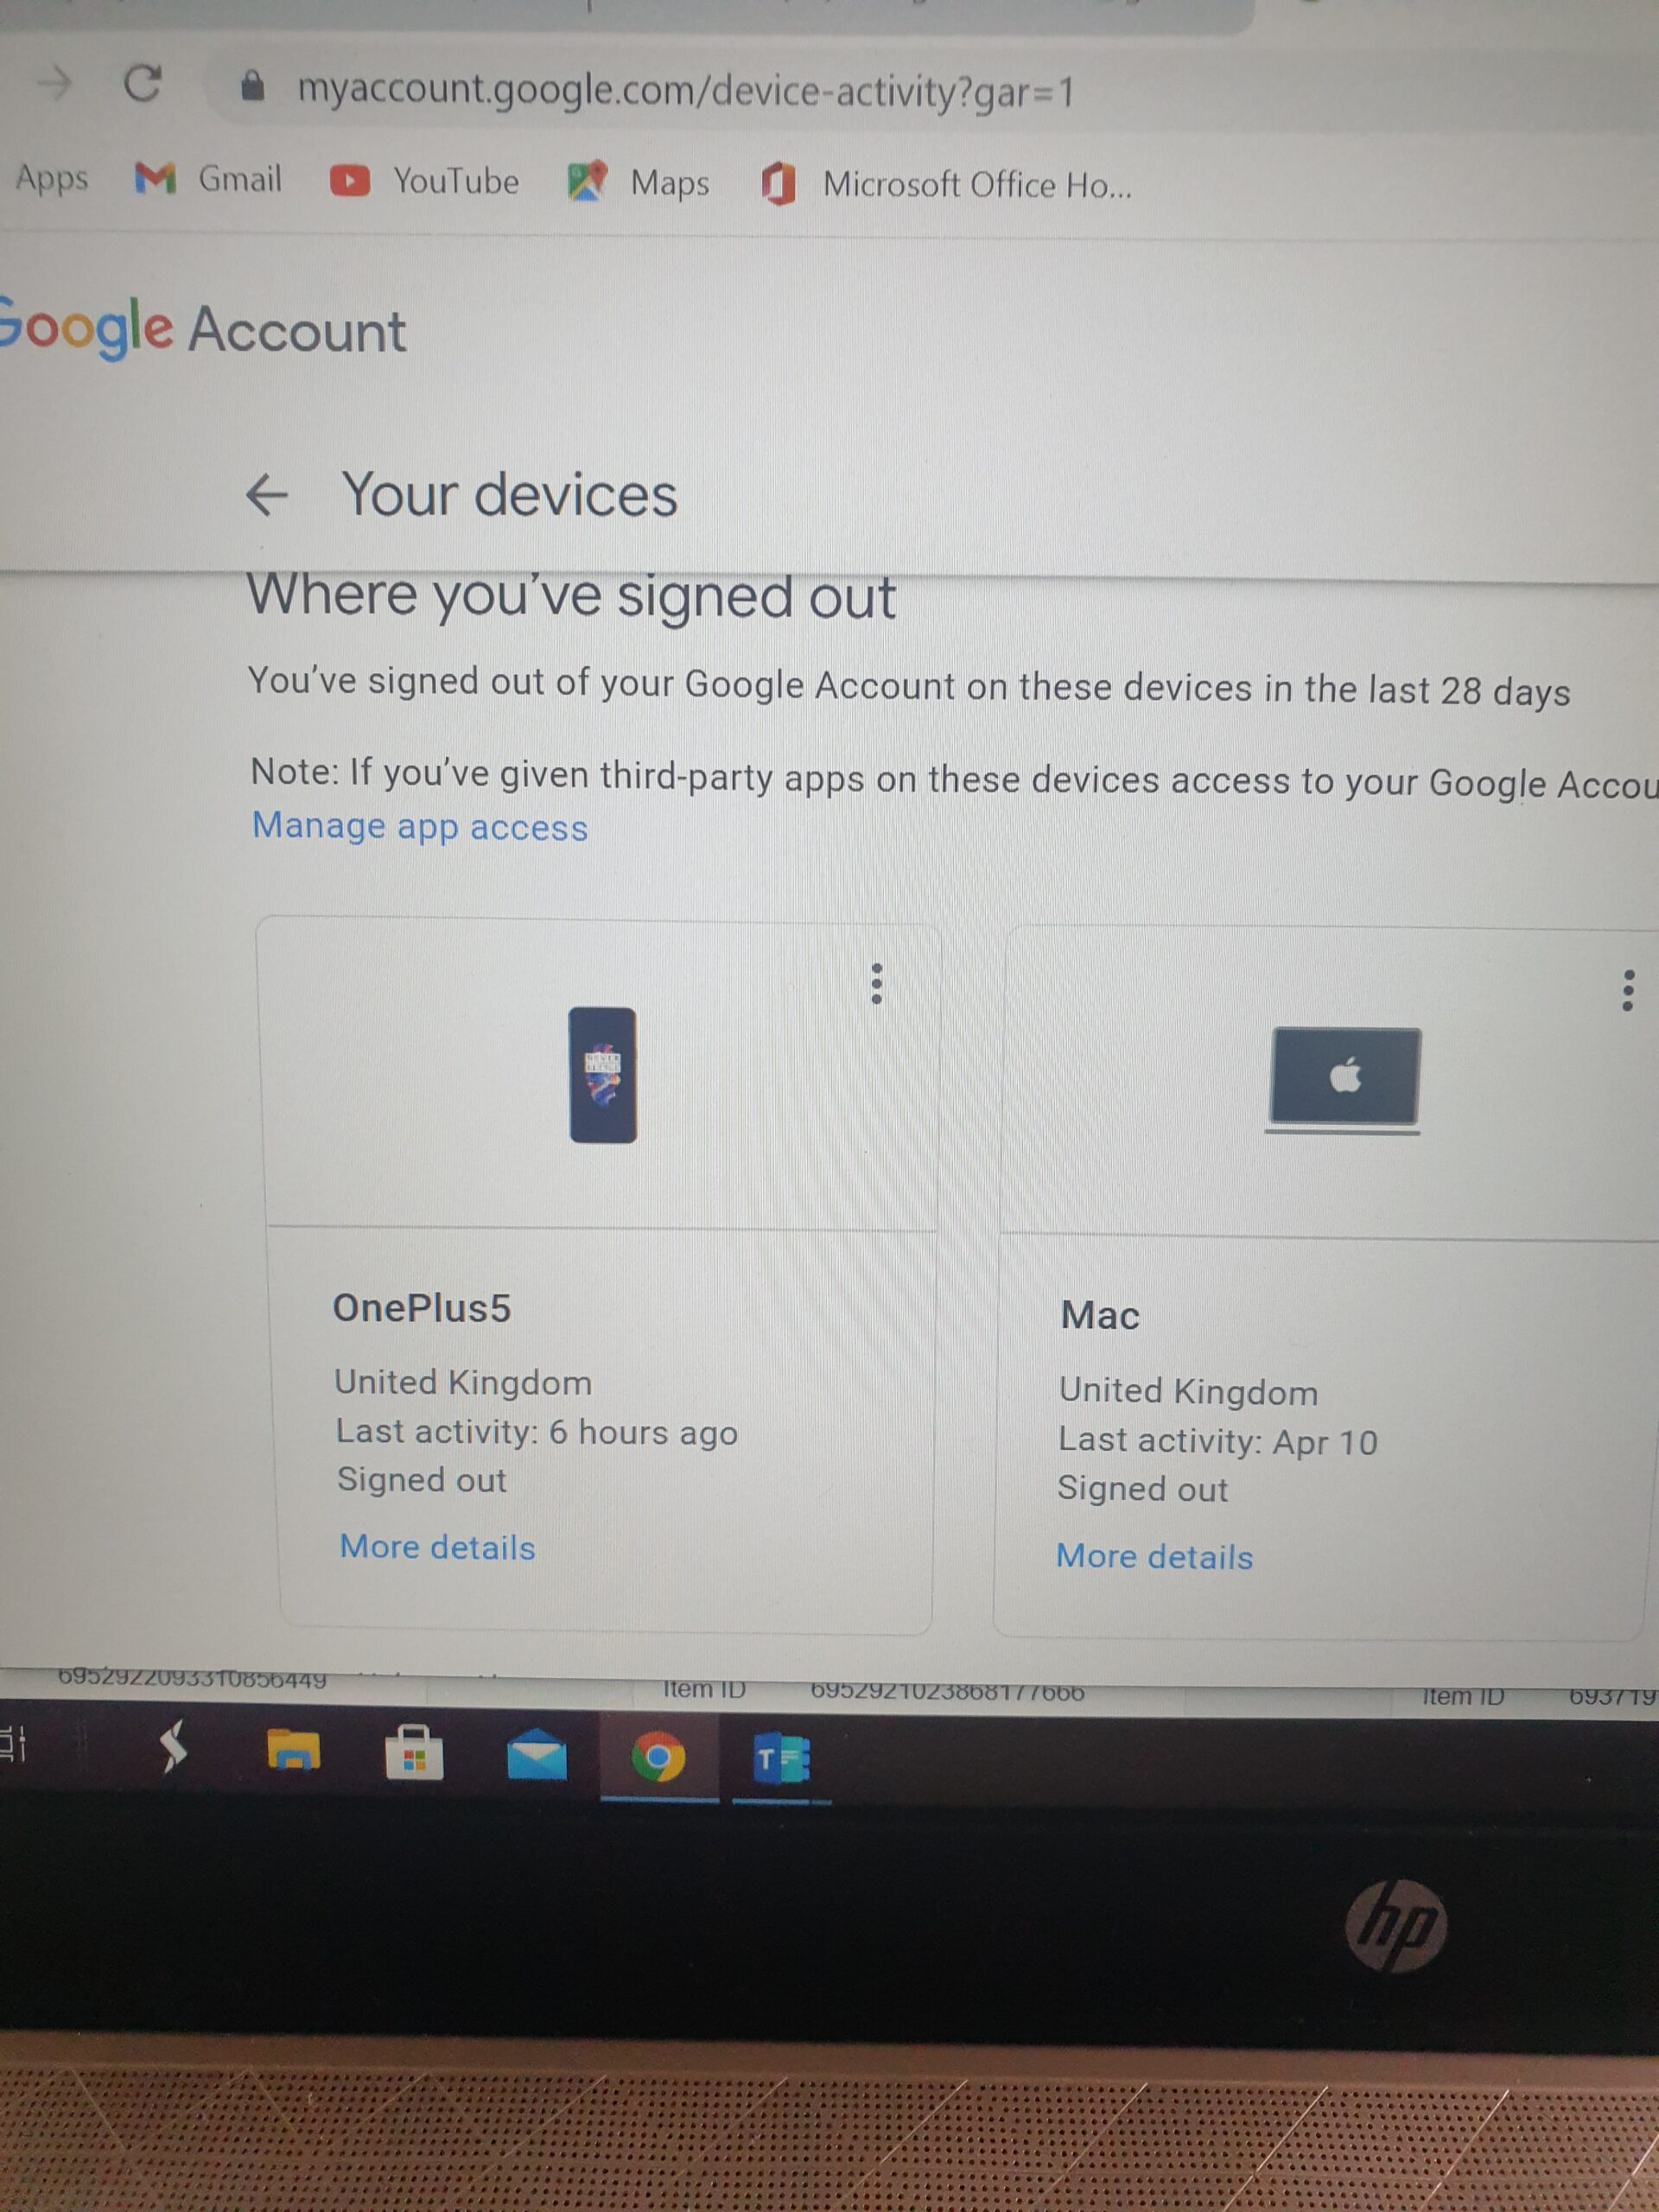 How to Track Google Account